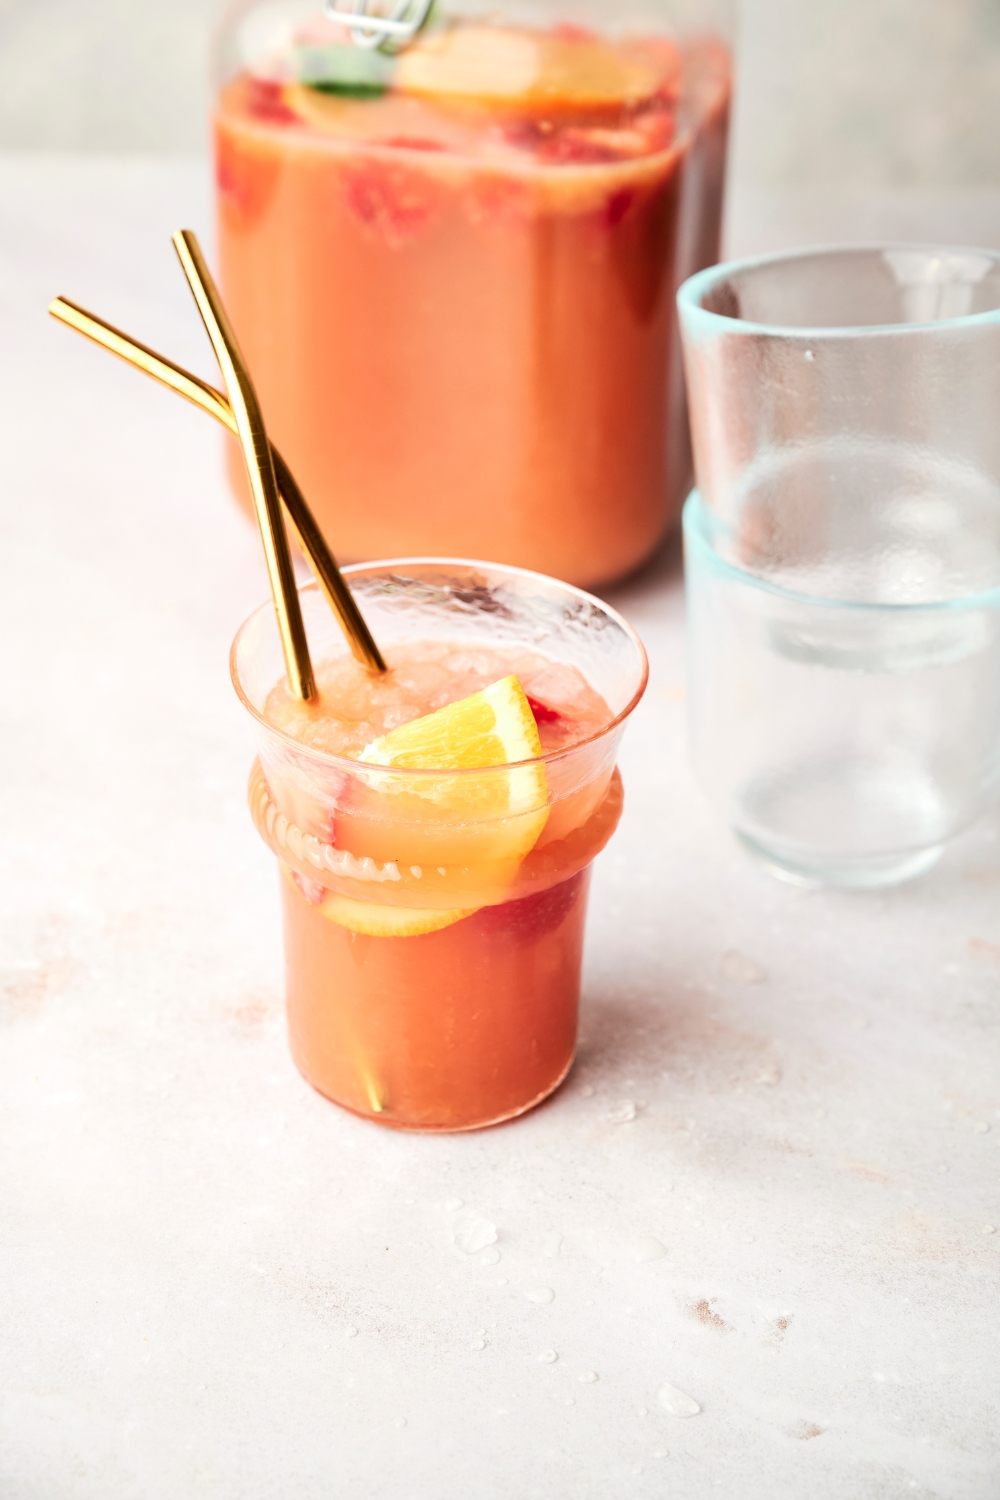 A small glass of jungle juice sits on a counter. It has orange wedges, strawberries, and straws in it.